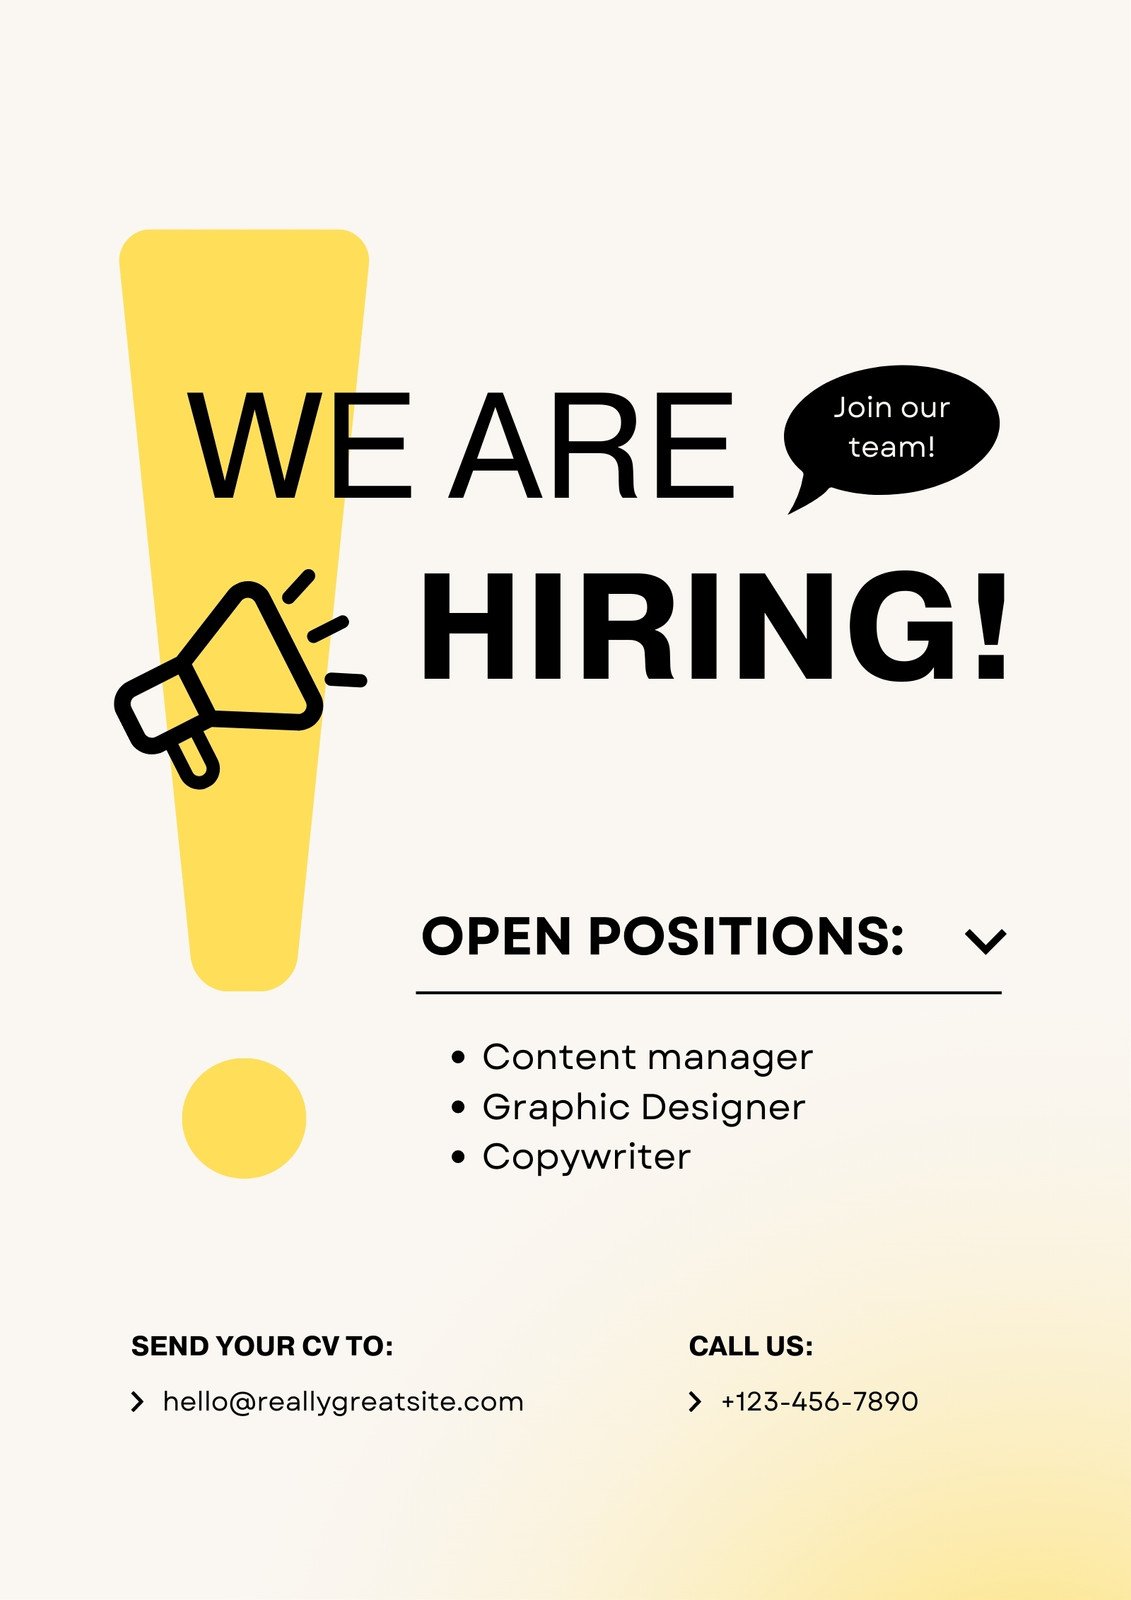 Canva Beige And Yellow Modern Job Vacancy We Are Hiring Poster 9ODt6omvLJs 